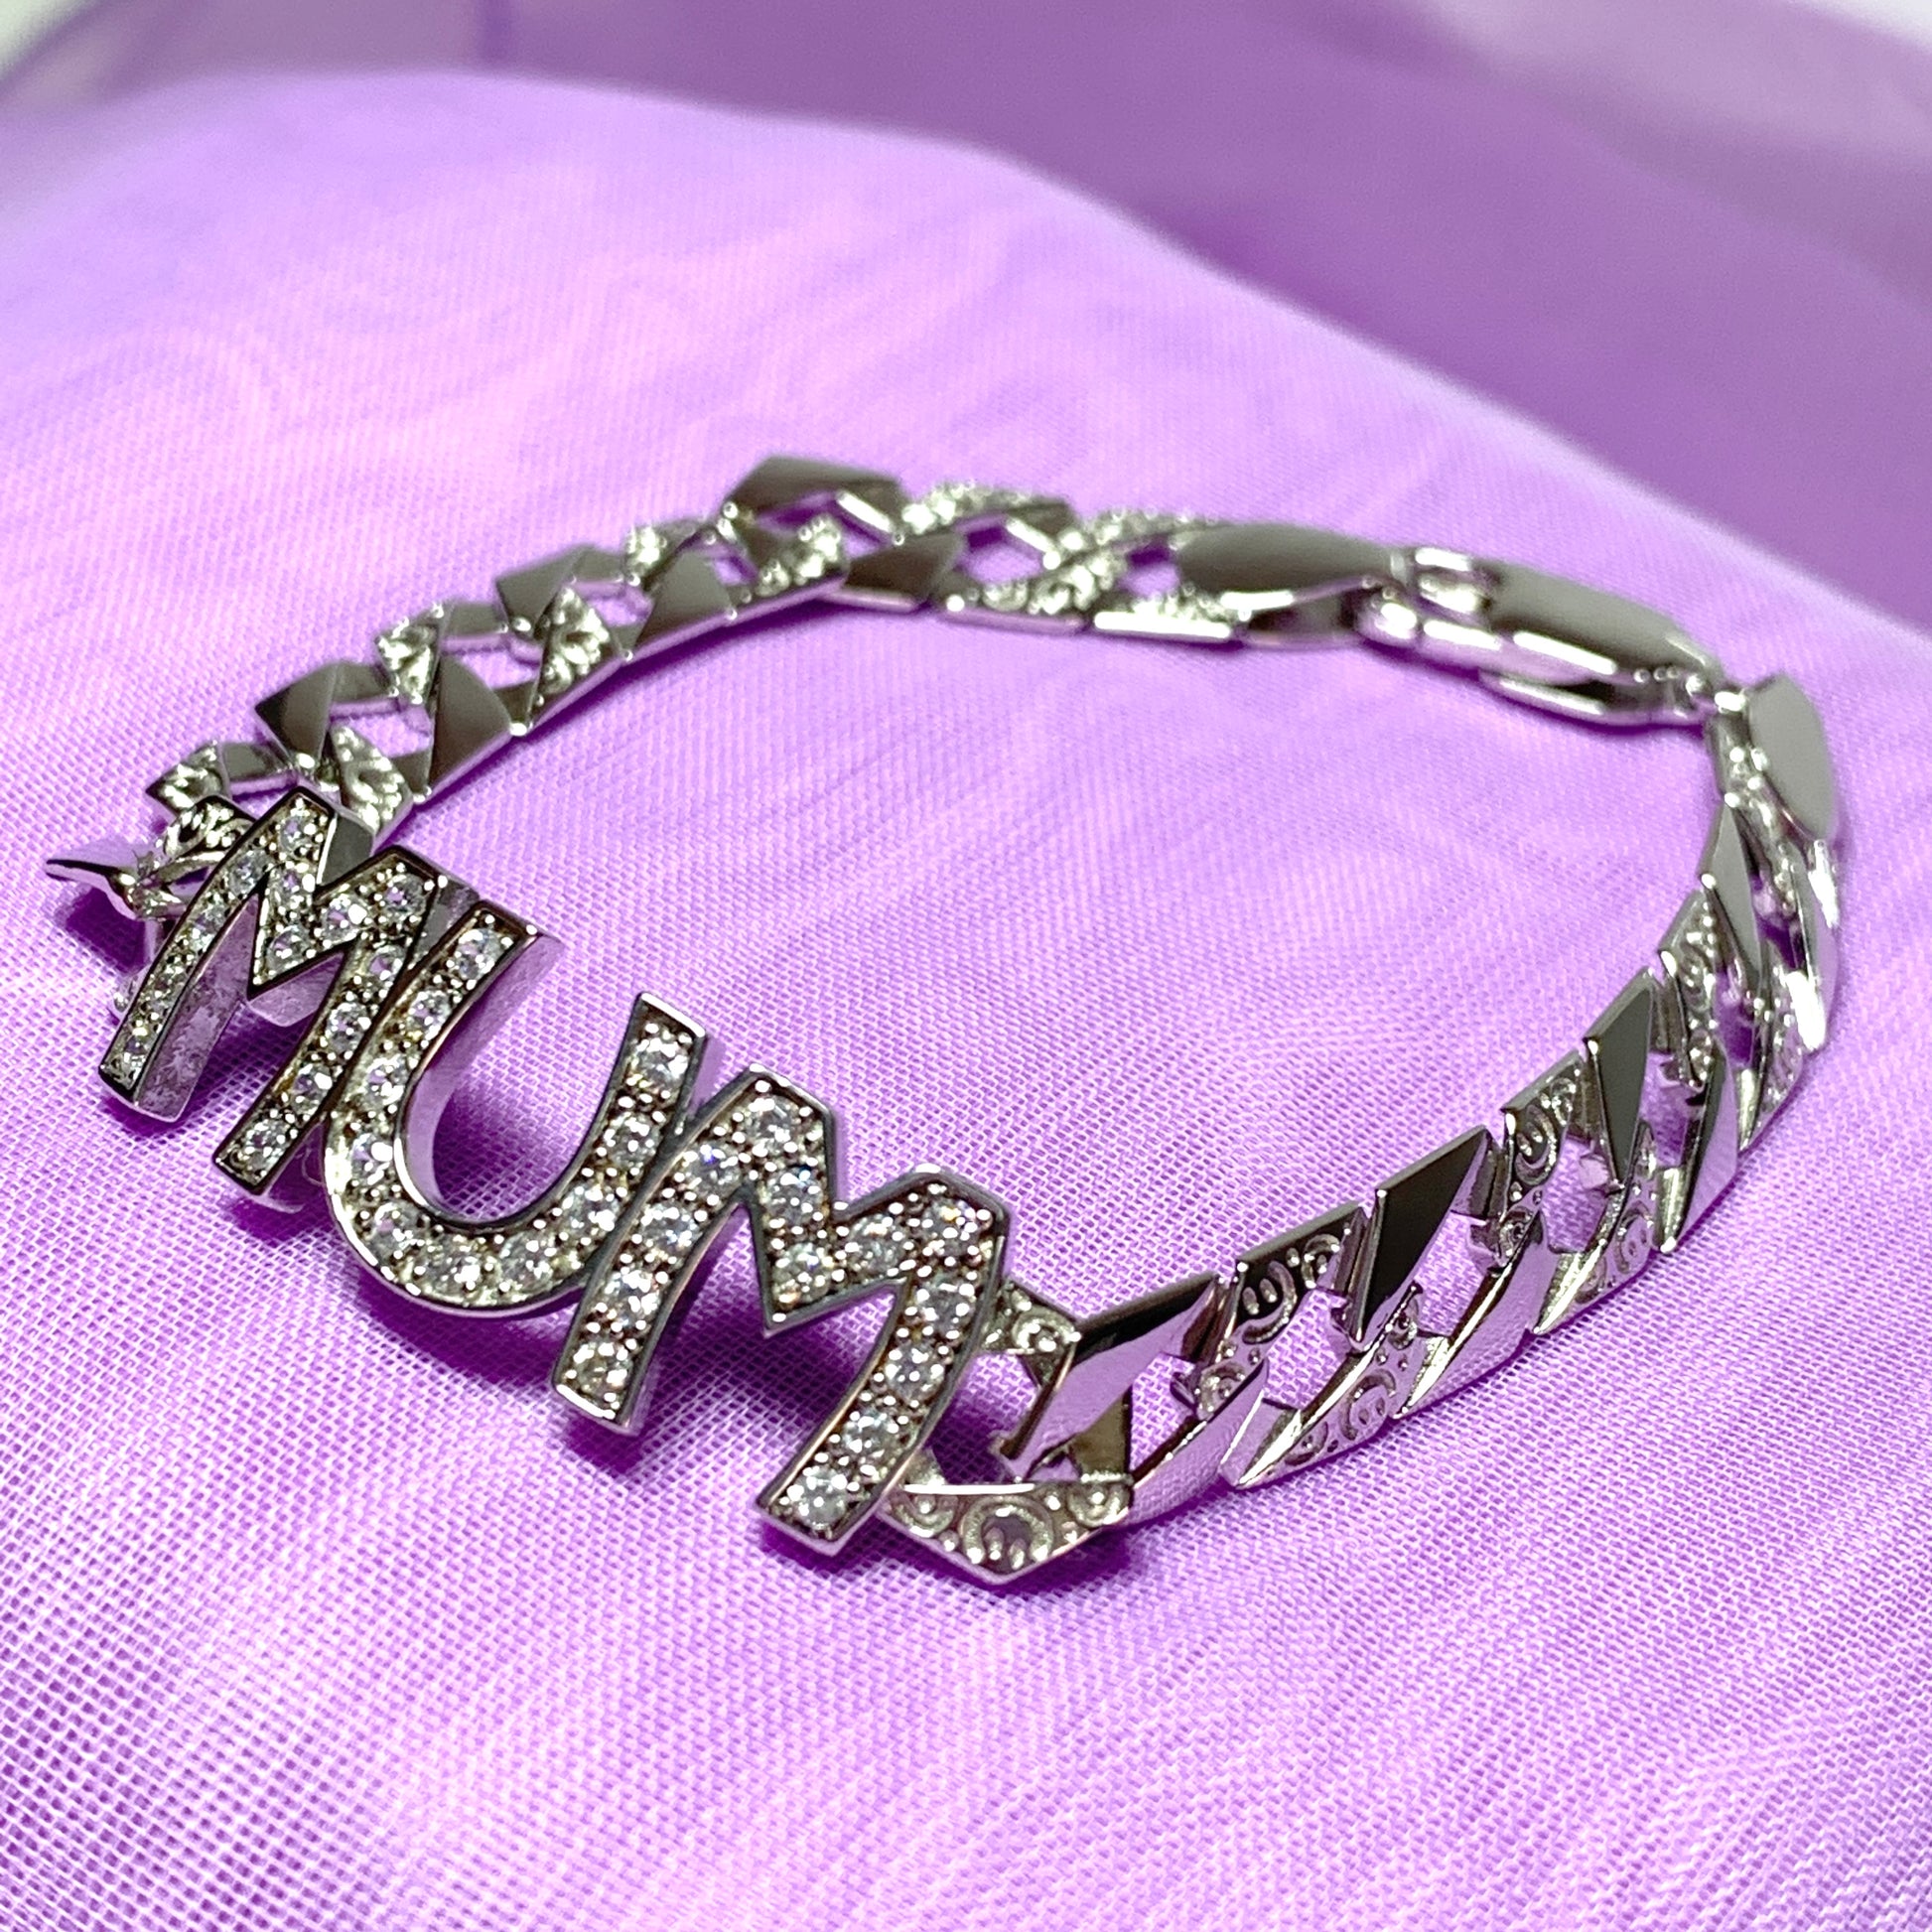 Solid sterling silver mum bracelet set with cubic zirconia